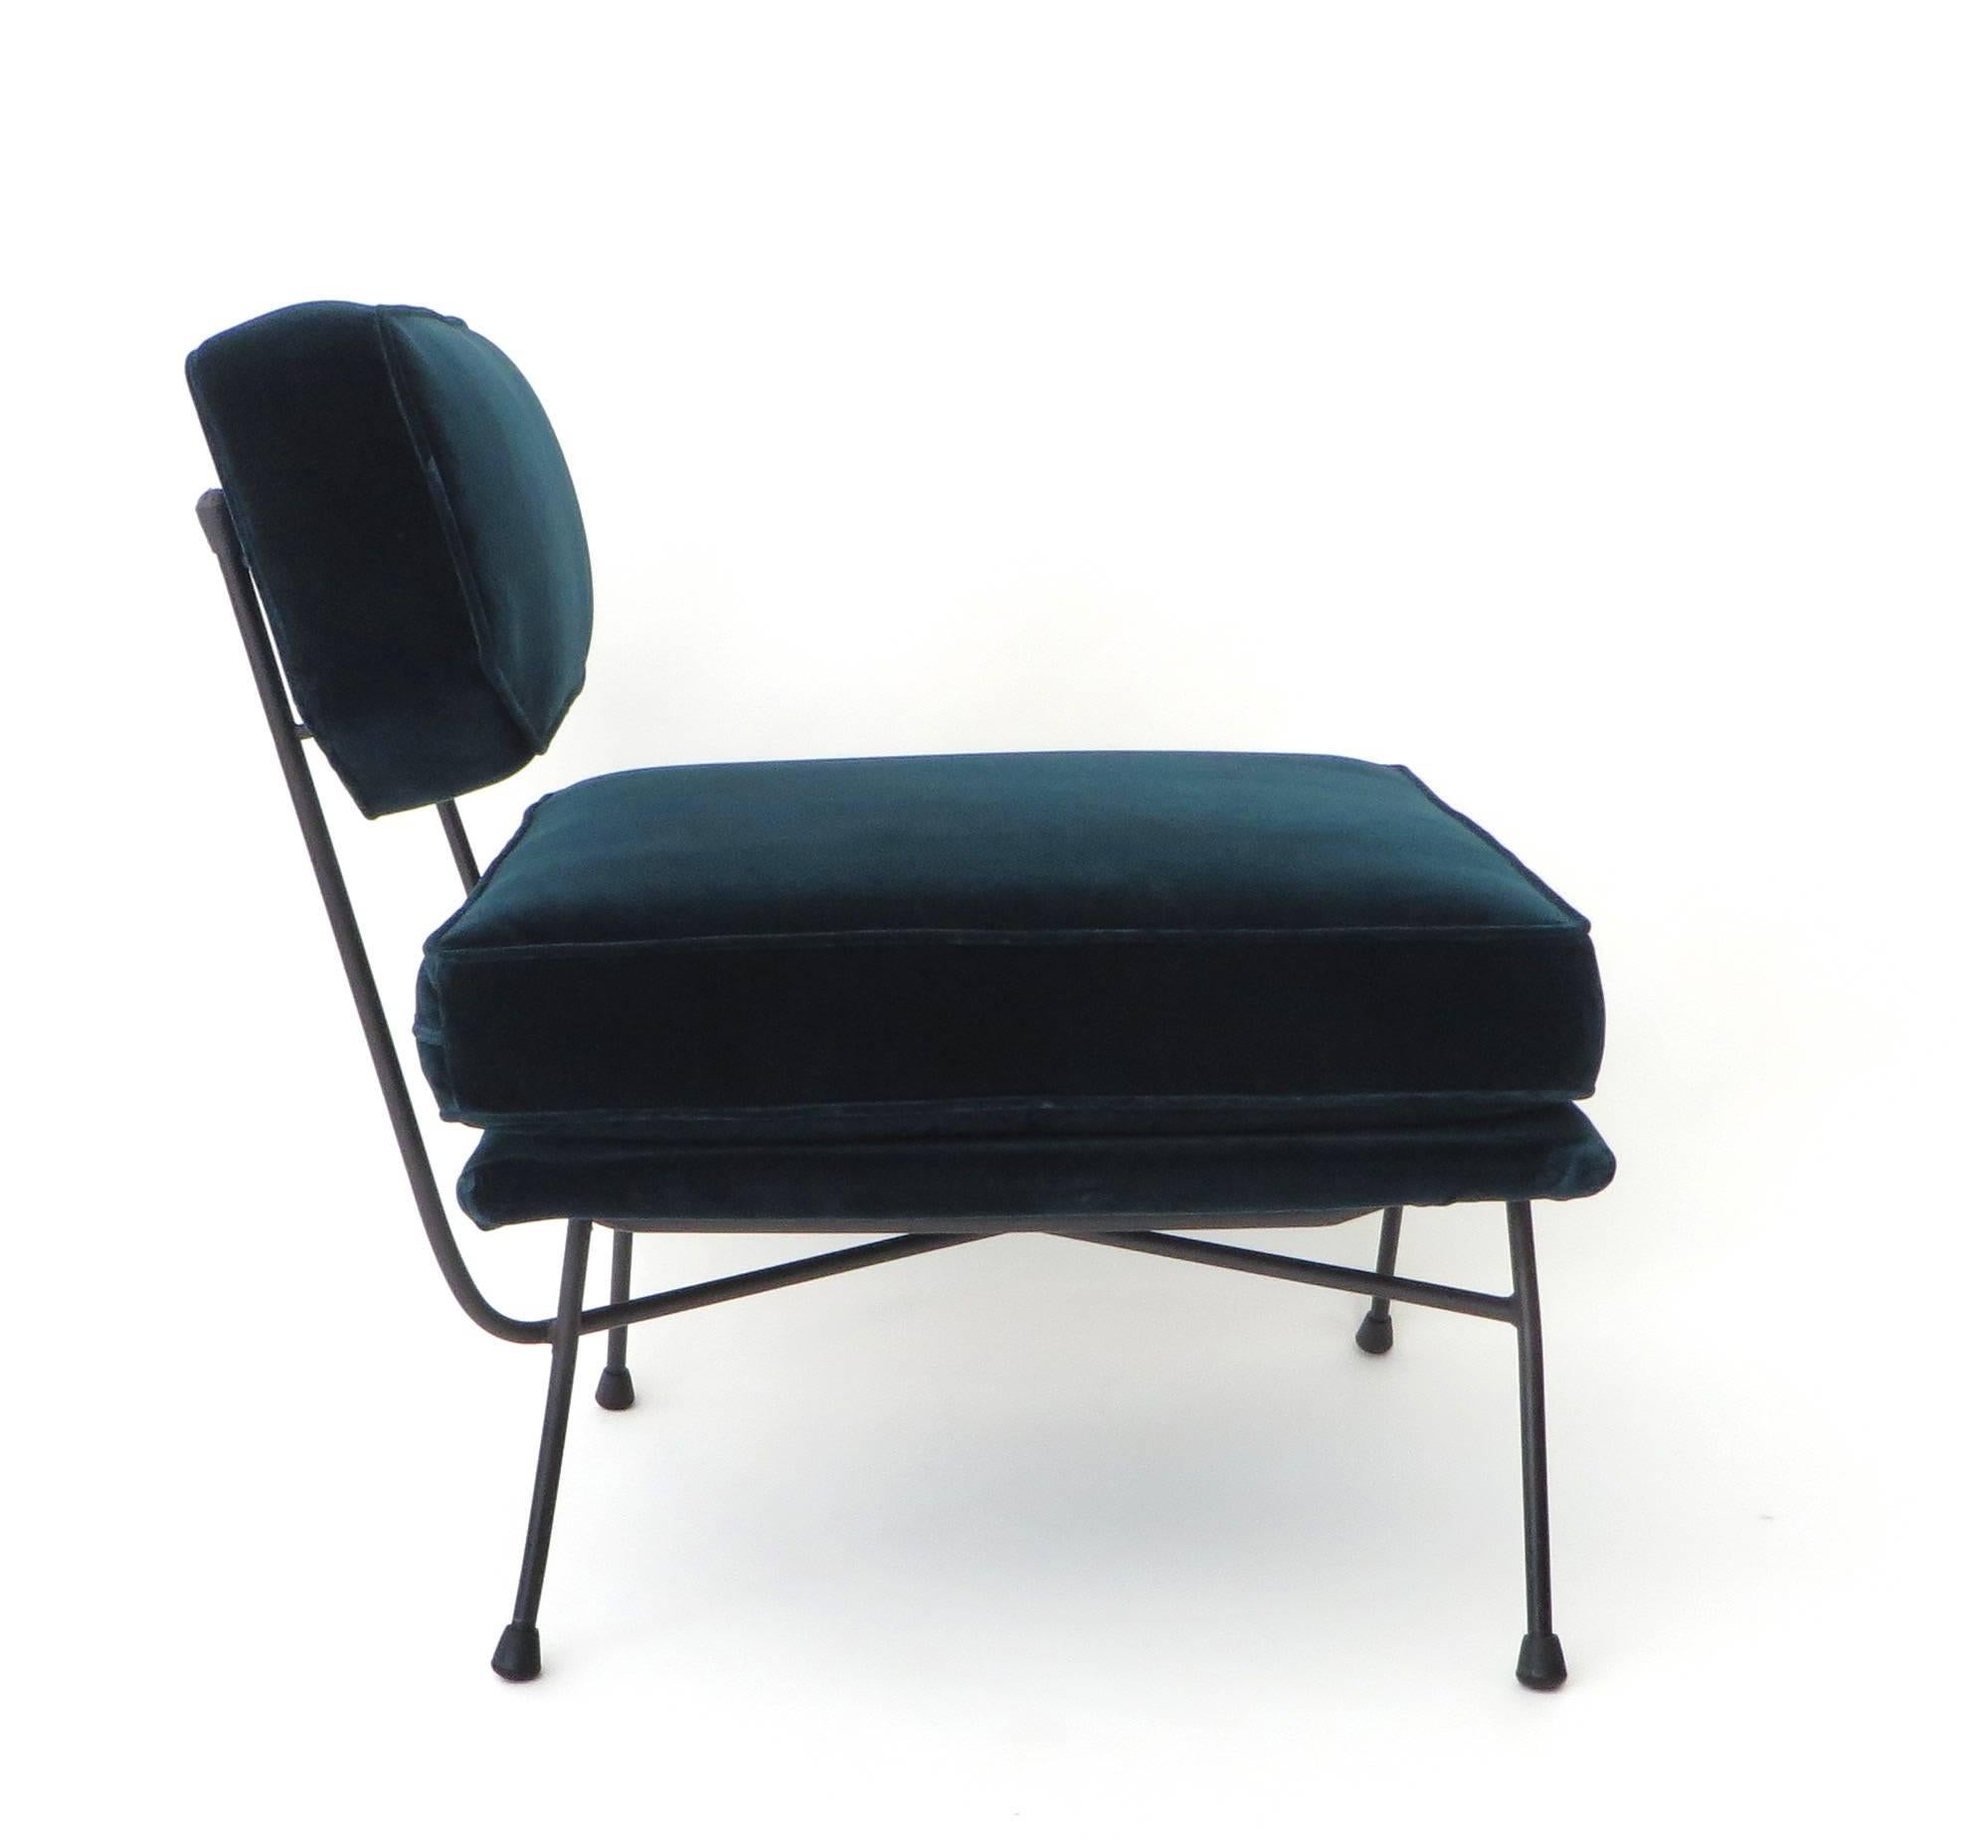 Italian Elletra lounge chair by B.B.P.R., Arflex, Milan, 1953. 
The structure is tubular lacquered iron, with rubber tips. New deep dark oil spot blue velvet upholstery. 
Bibliography: Domus, n. 324, novembre 1953; Domus, n. 395, ottobre 1962, p.